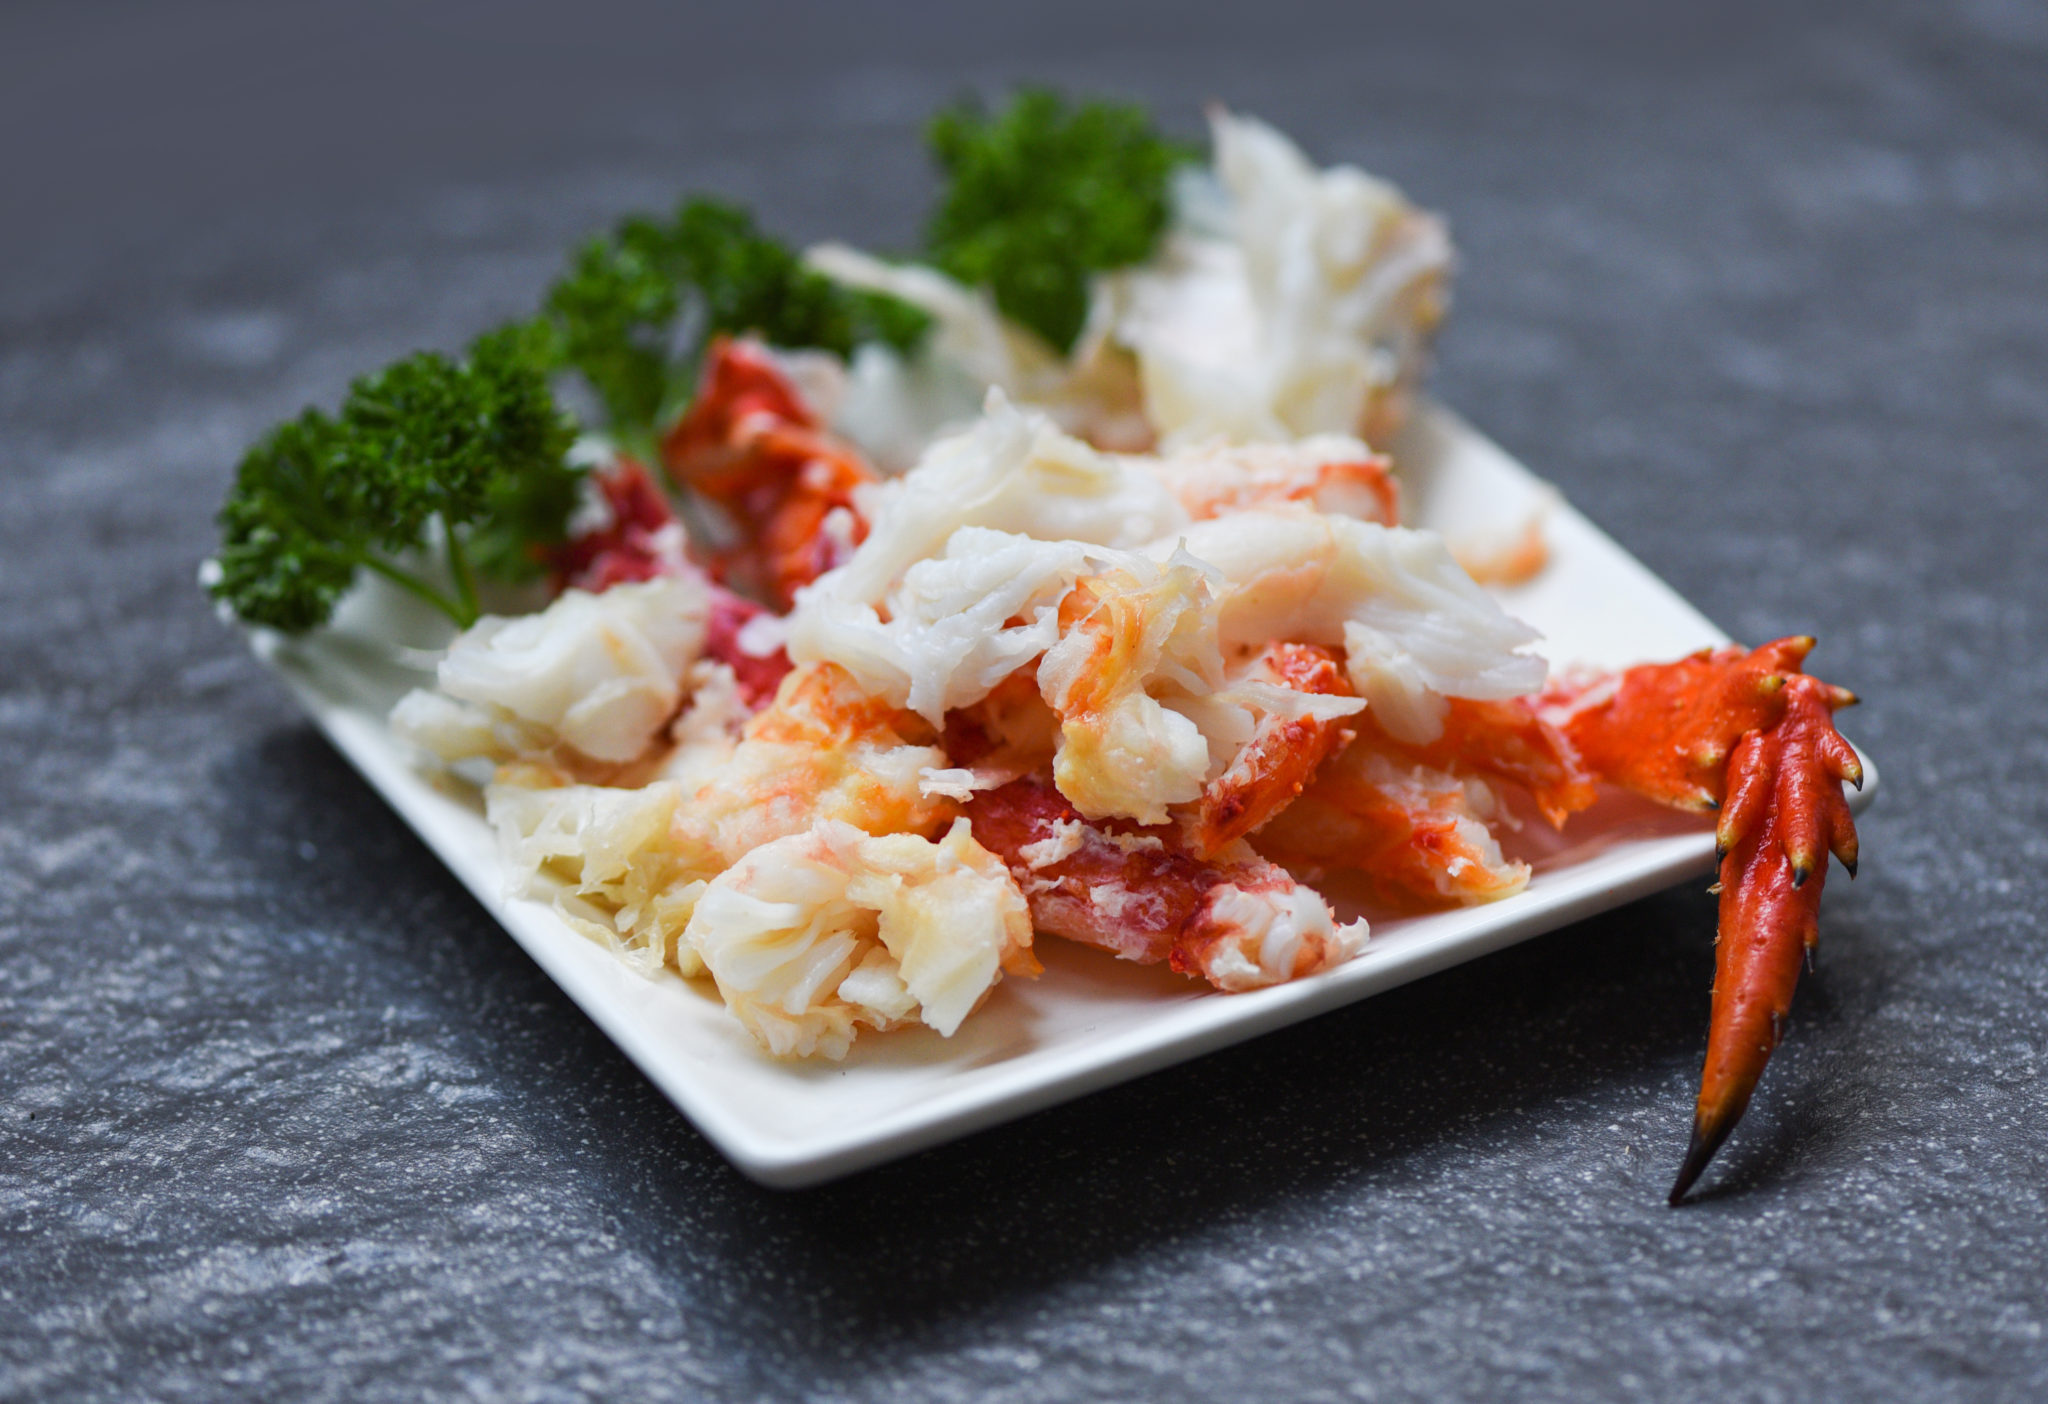 how to tell if imitation crab meat is bad